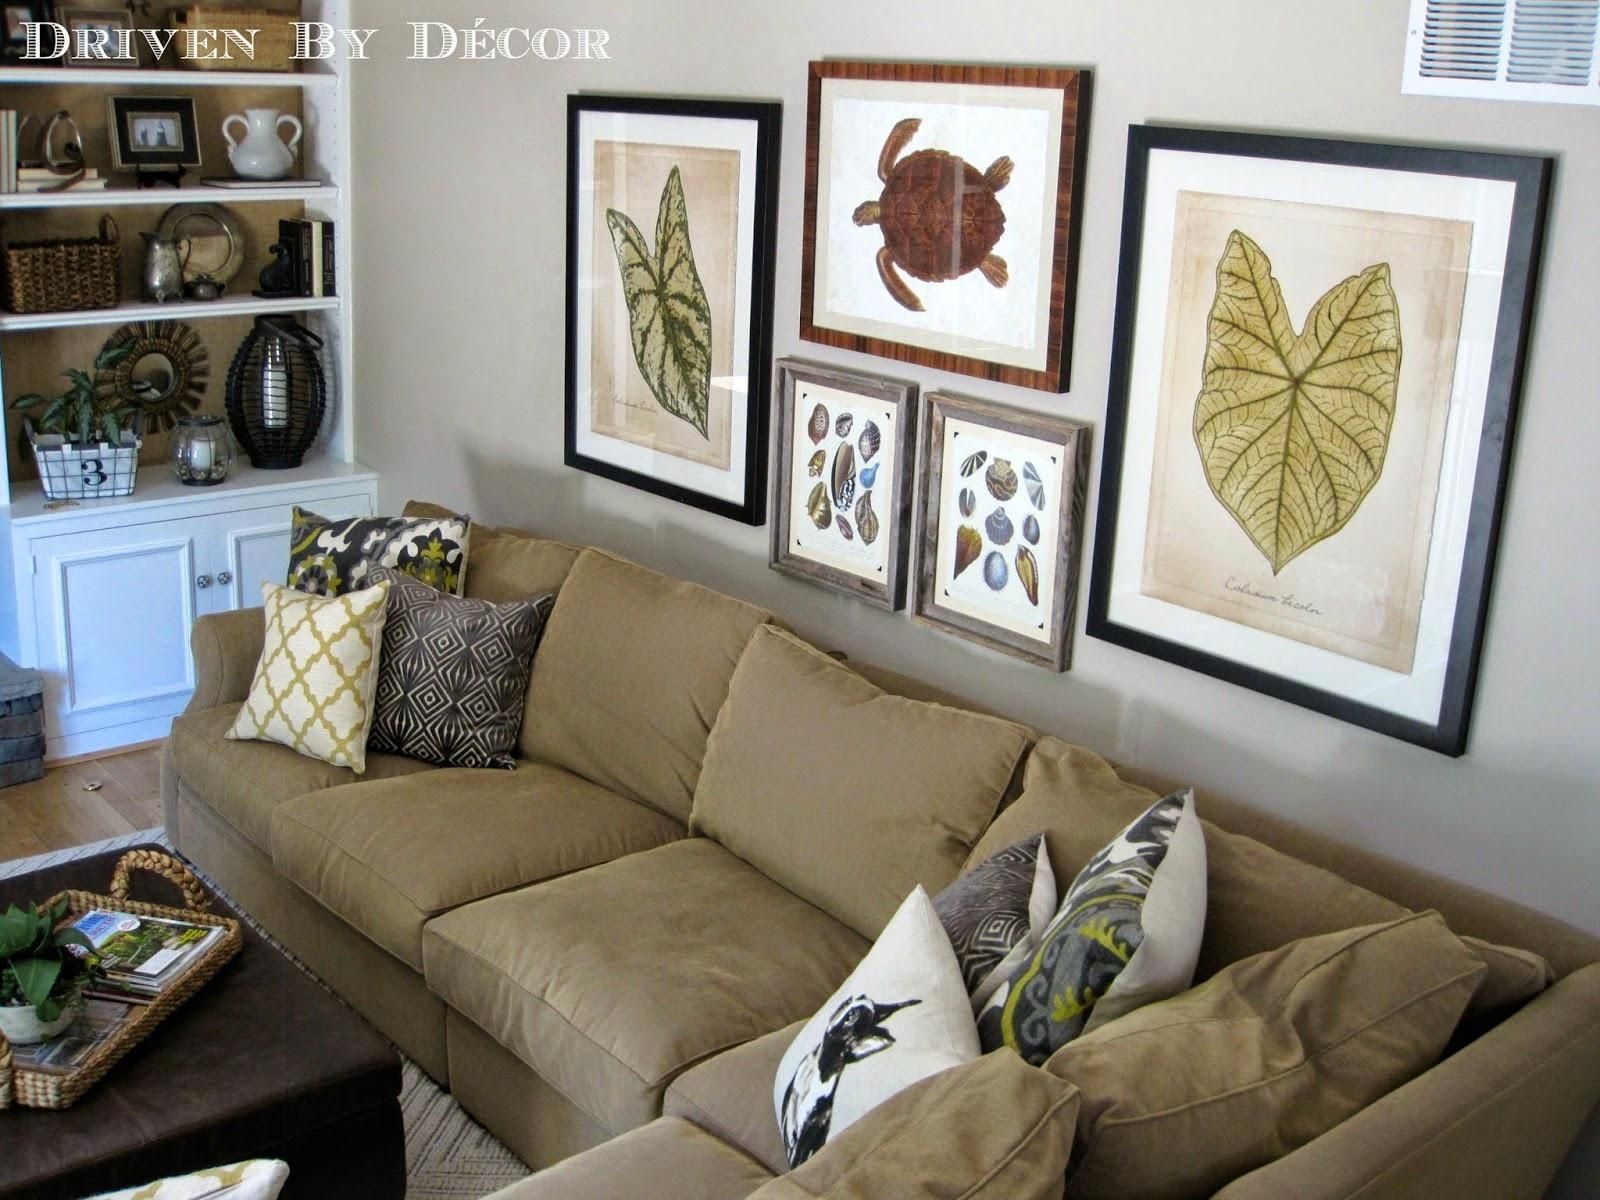 House Tour: Family Room | Drivendecor Inside Wall Art Decor For Family Room (View 8 of 20)